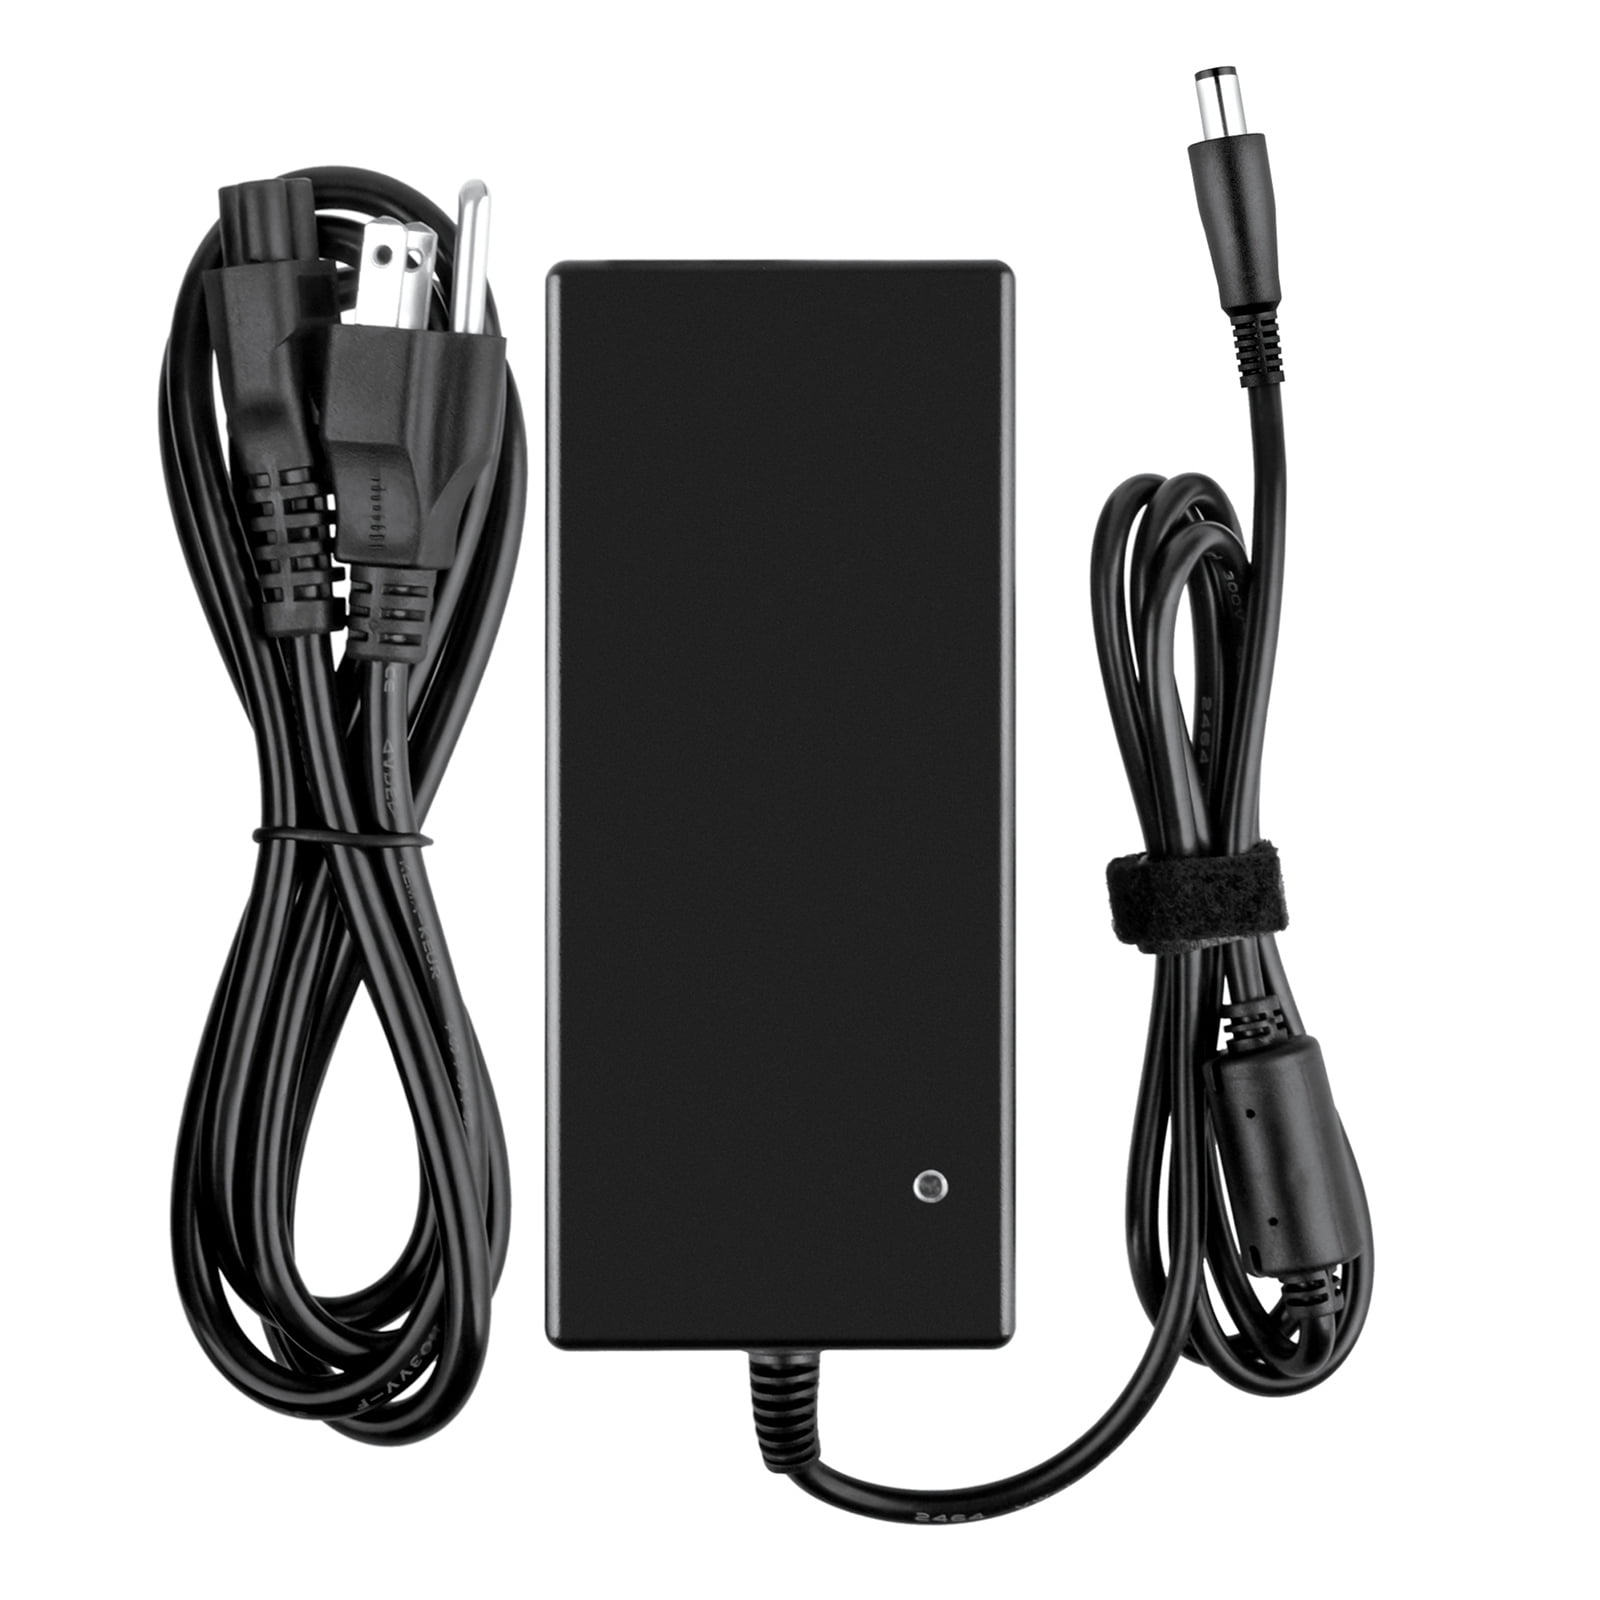 NEW 120W AC Adapter Charger For Sony Vaio VPCF11KFX/B VPCF1290X VPCF111FX & Cord 